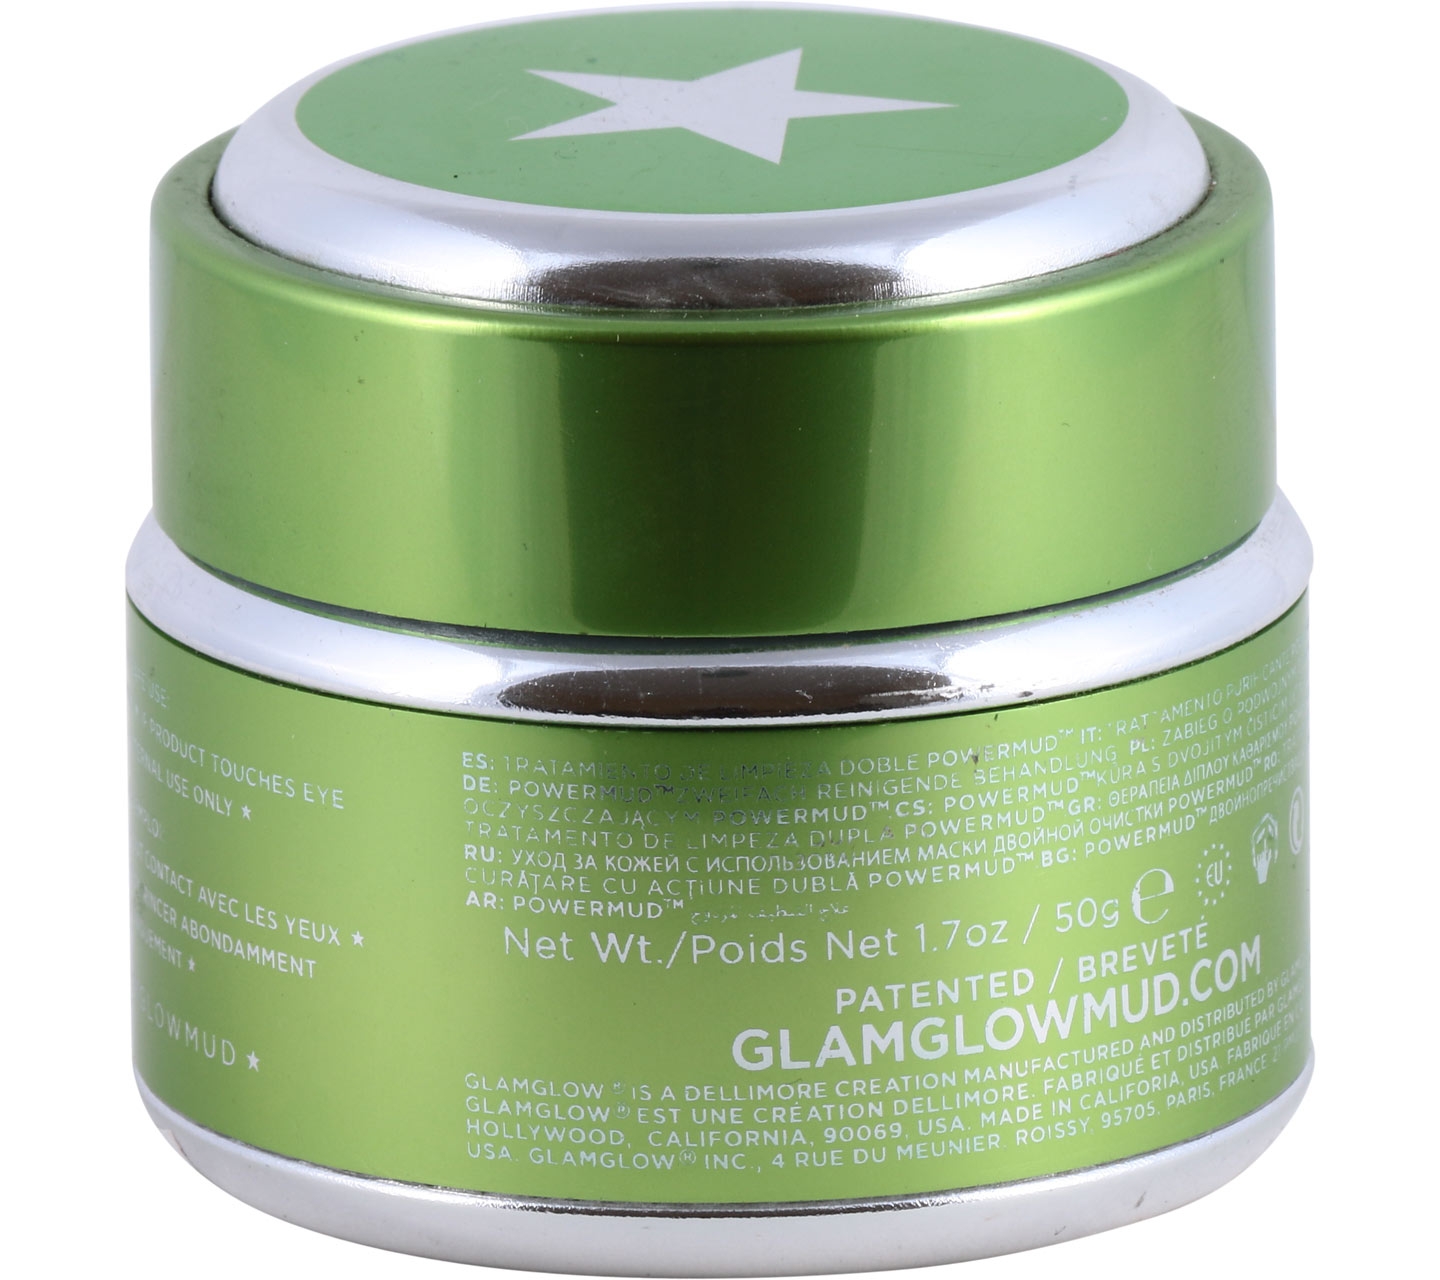 Glamglow Powermud Dualcleanse Treatment Mud to Oil Skin Care